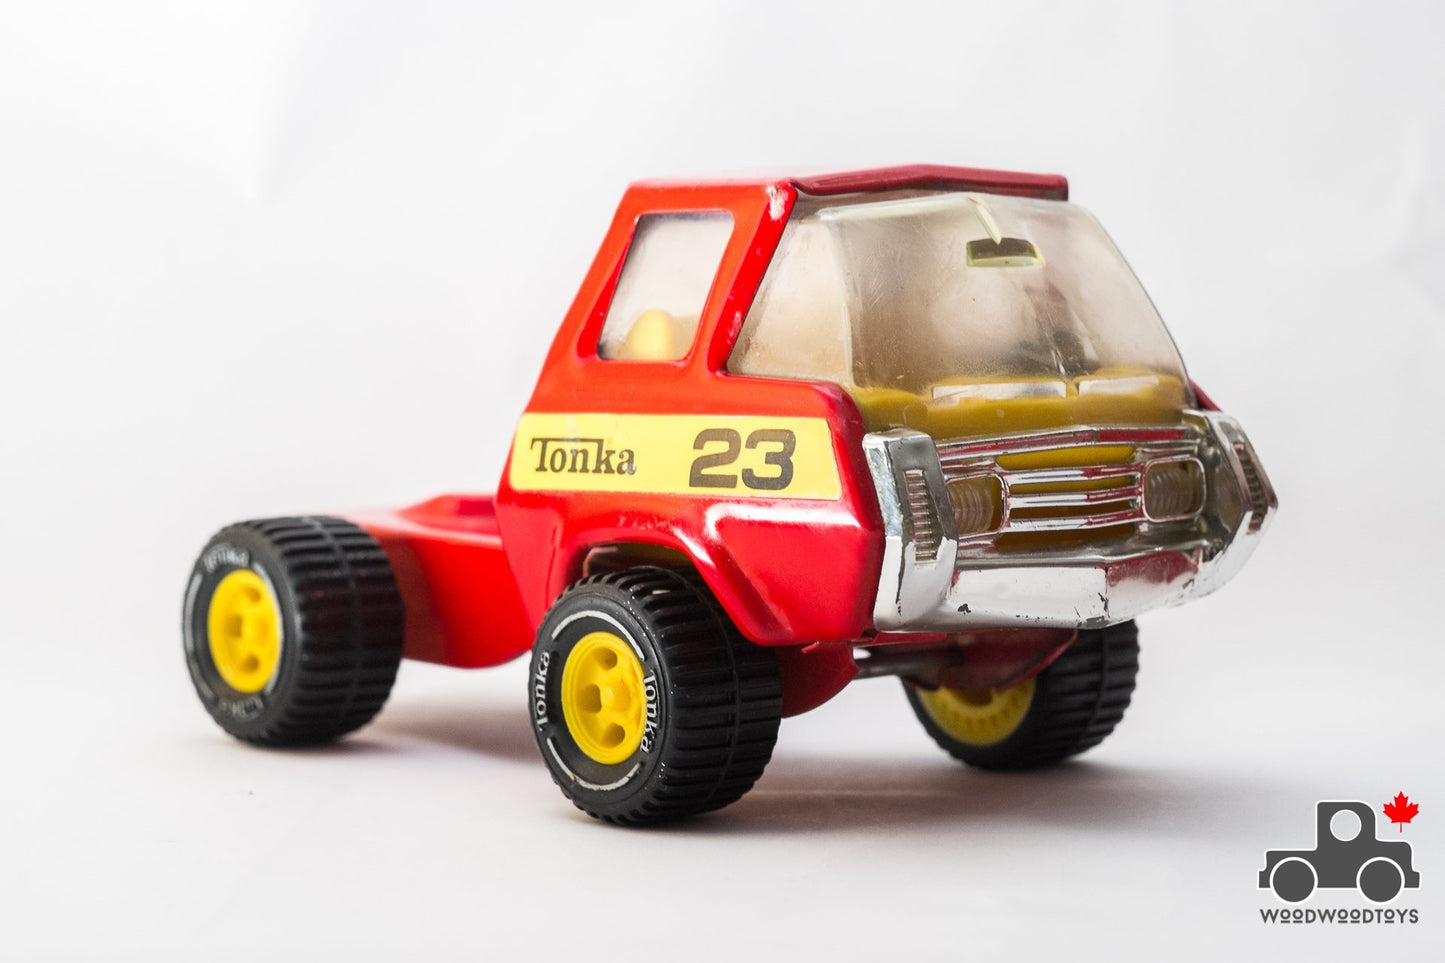 Vintage Tonka Pressed Steel #23 Cab Over Tractor - Wood Wood Toys Canada's Favourite Montessori Toy Store